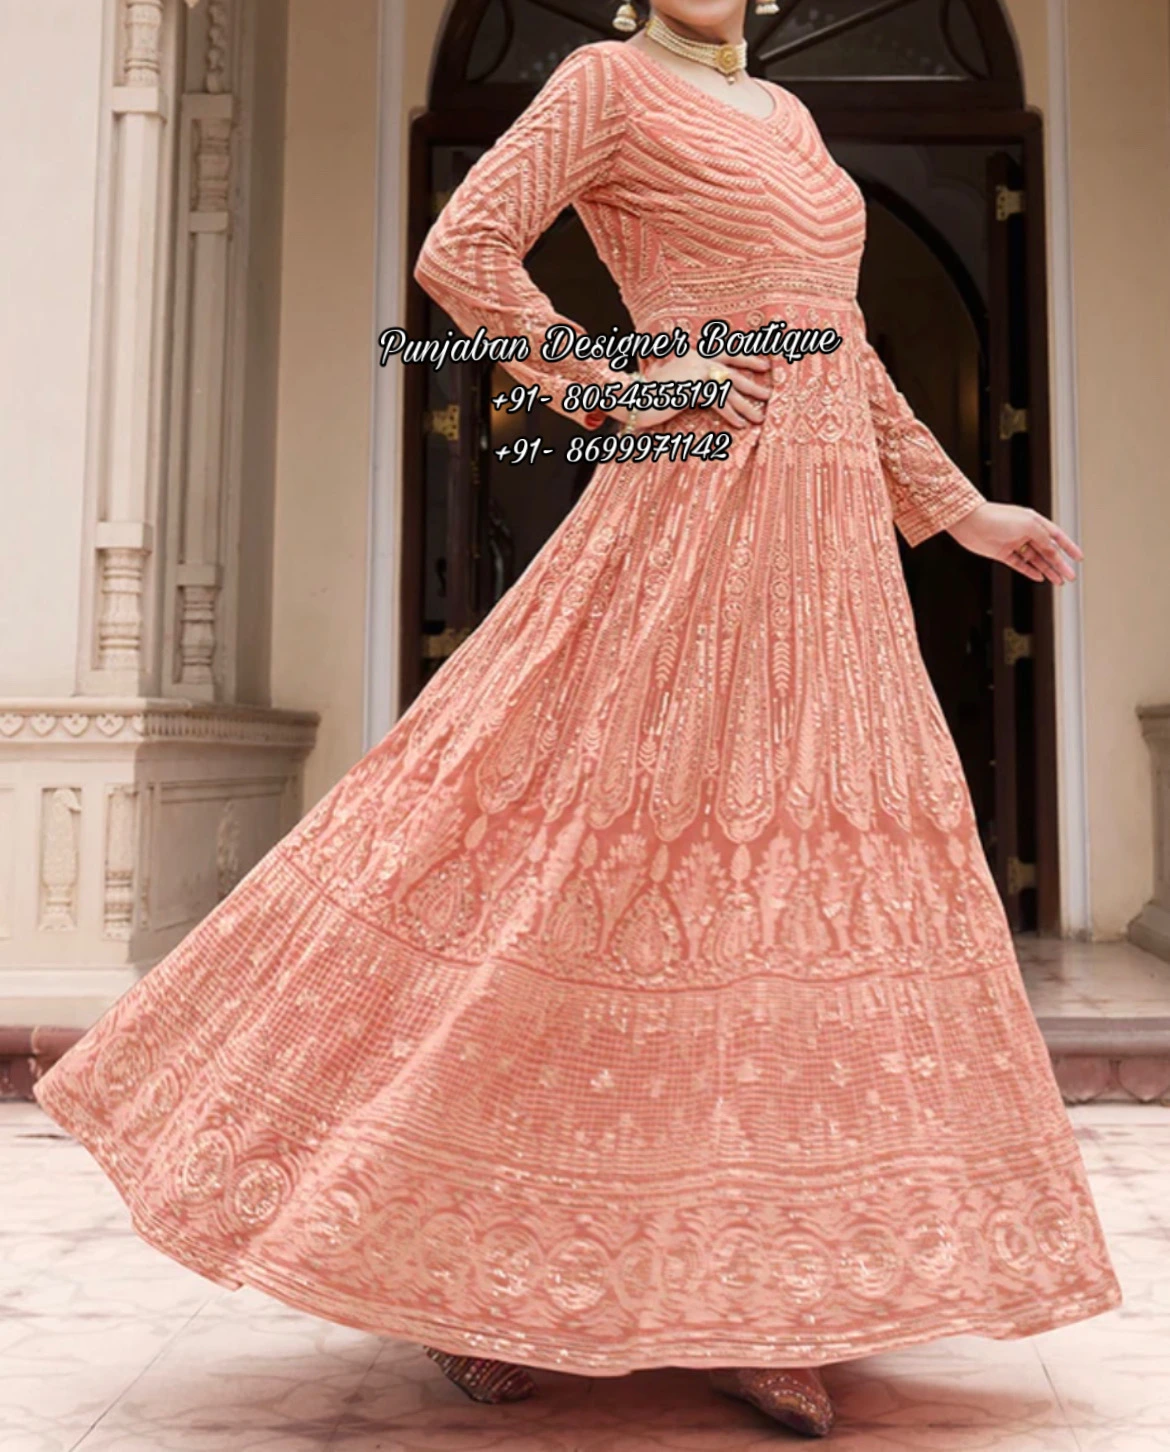 Designer Evening Gown - Get Best Price from Manufacturers & Suppliers in  India